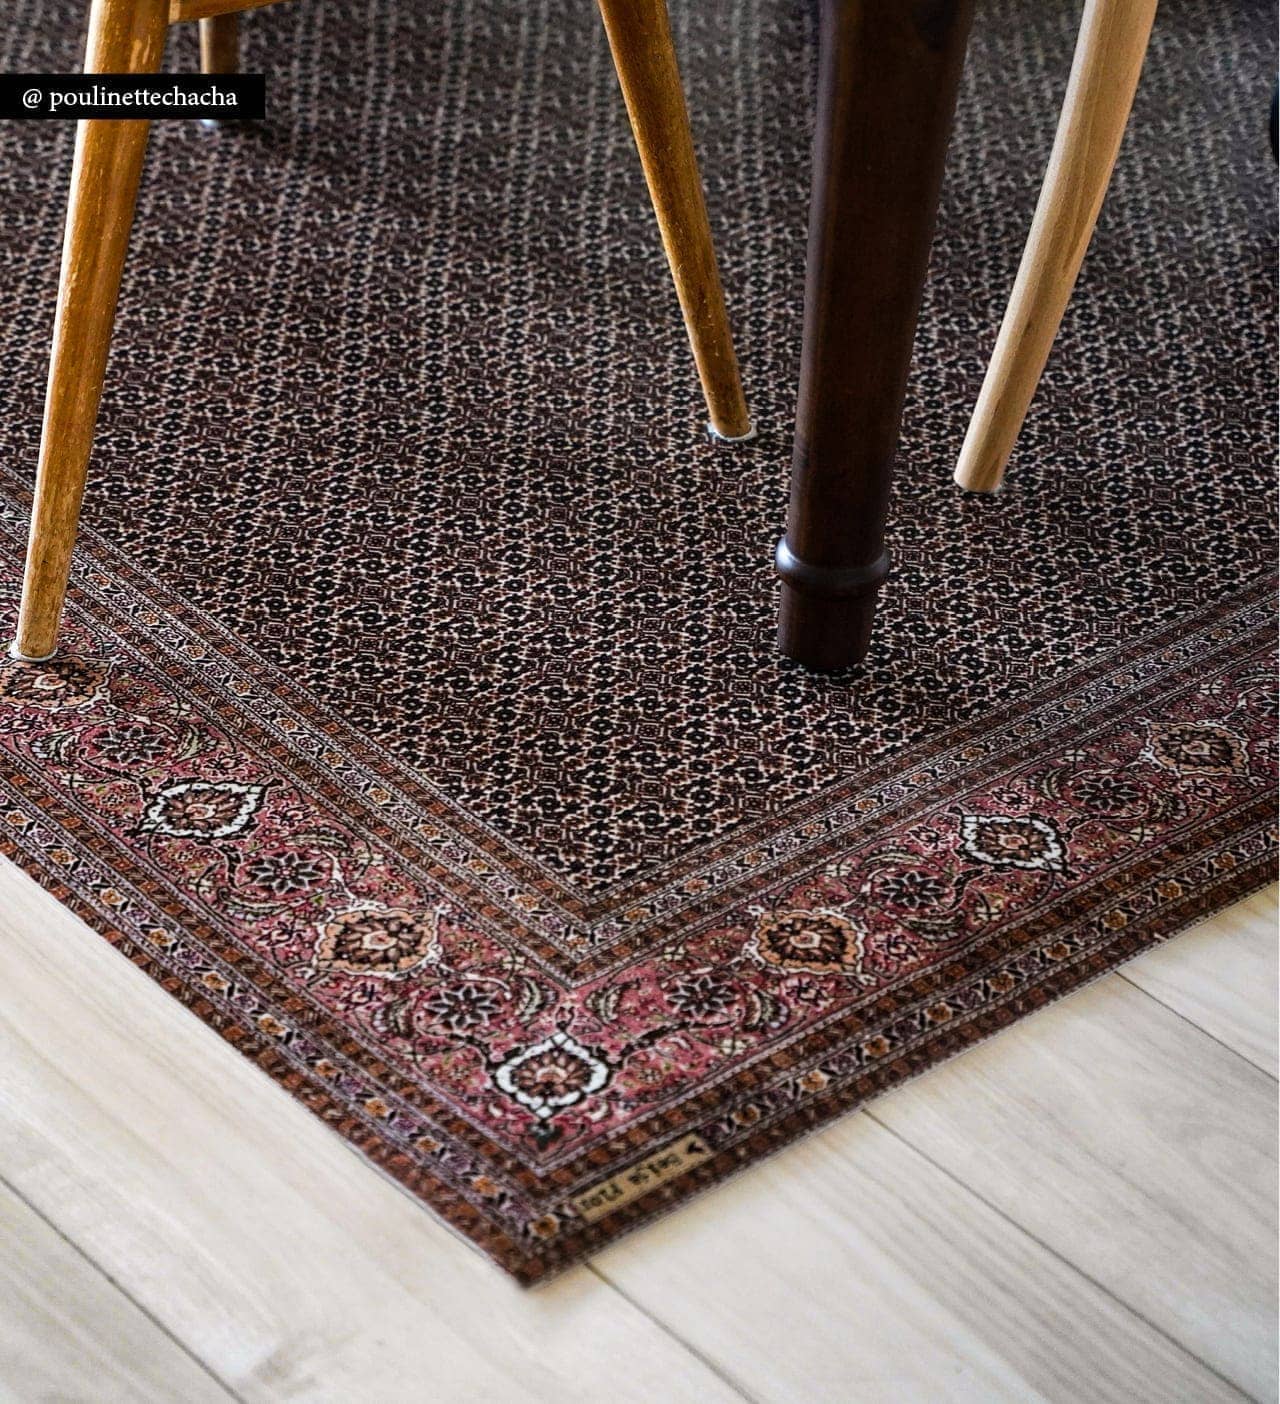 The corner of a Persian rug placed under a kitchen table with chair legs on top of it